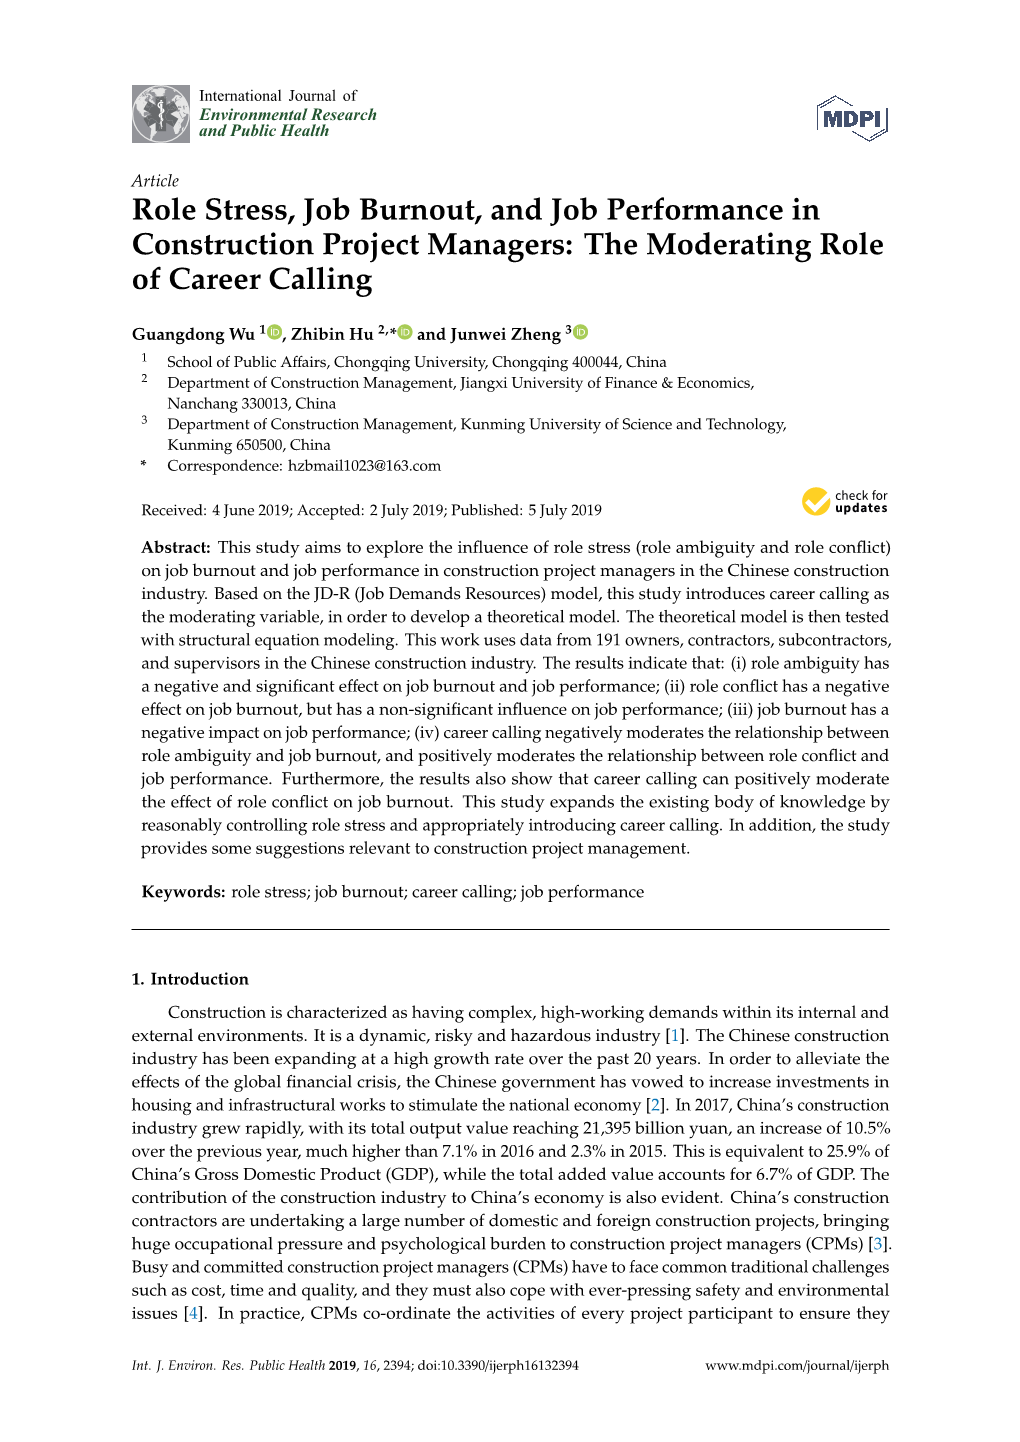 Role Stress, Job Burnout, and Job Performance in Construction Project Managers: the Moderating Role of Career Calling